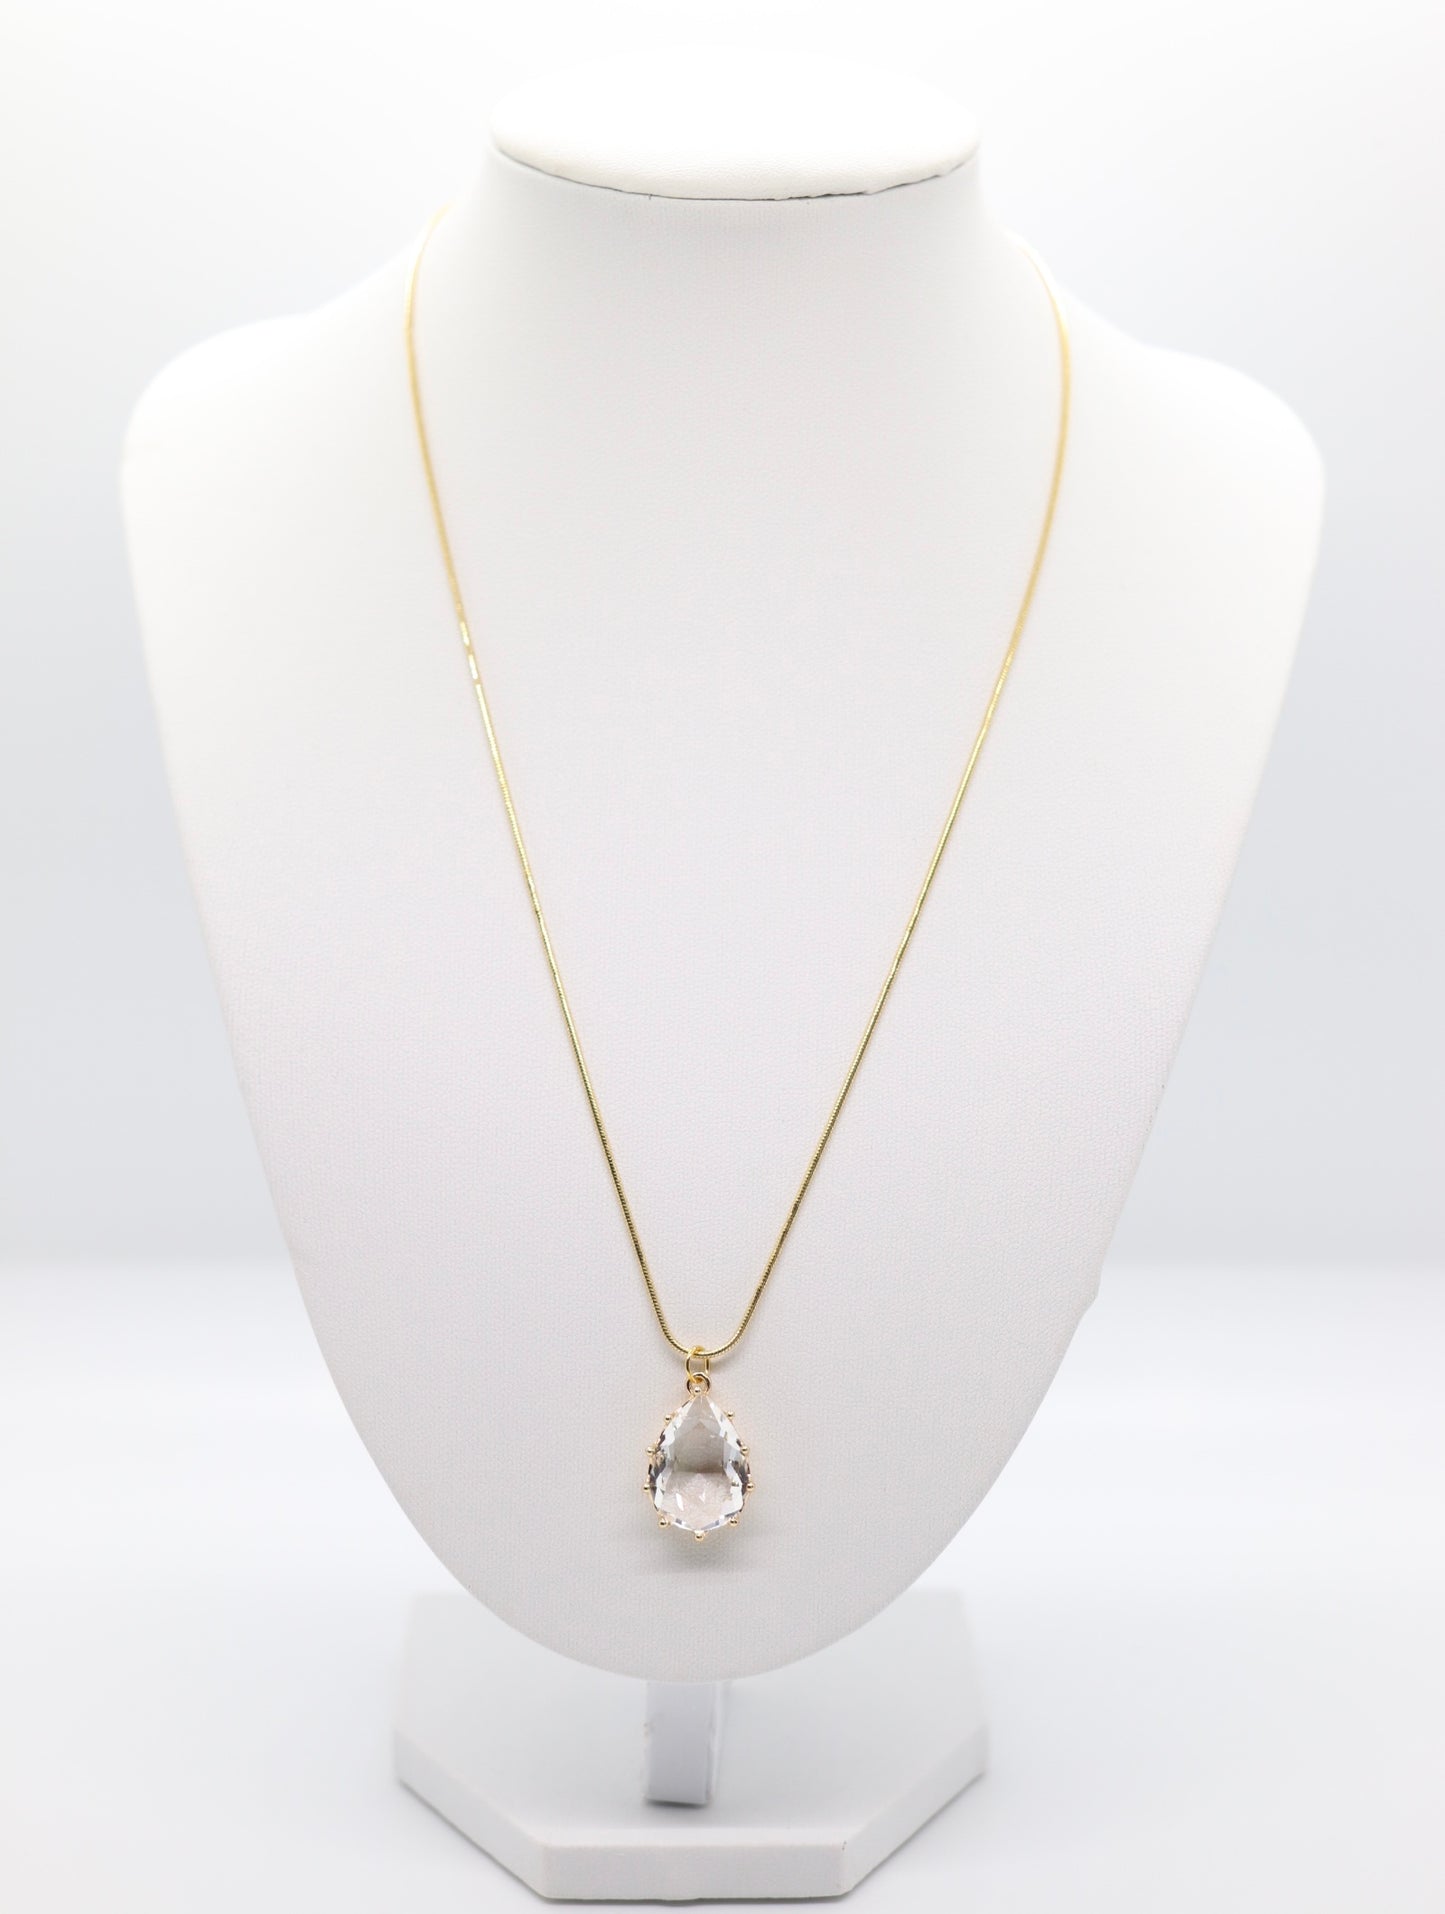 Gold Snake Chain w/Clear Teardrop Pendant Necklace